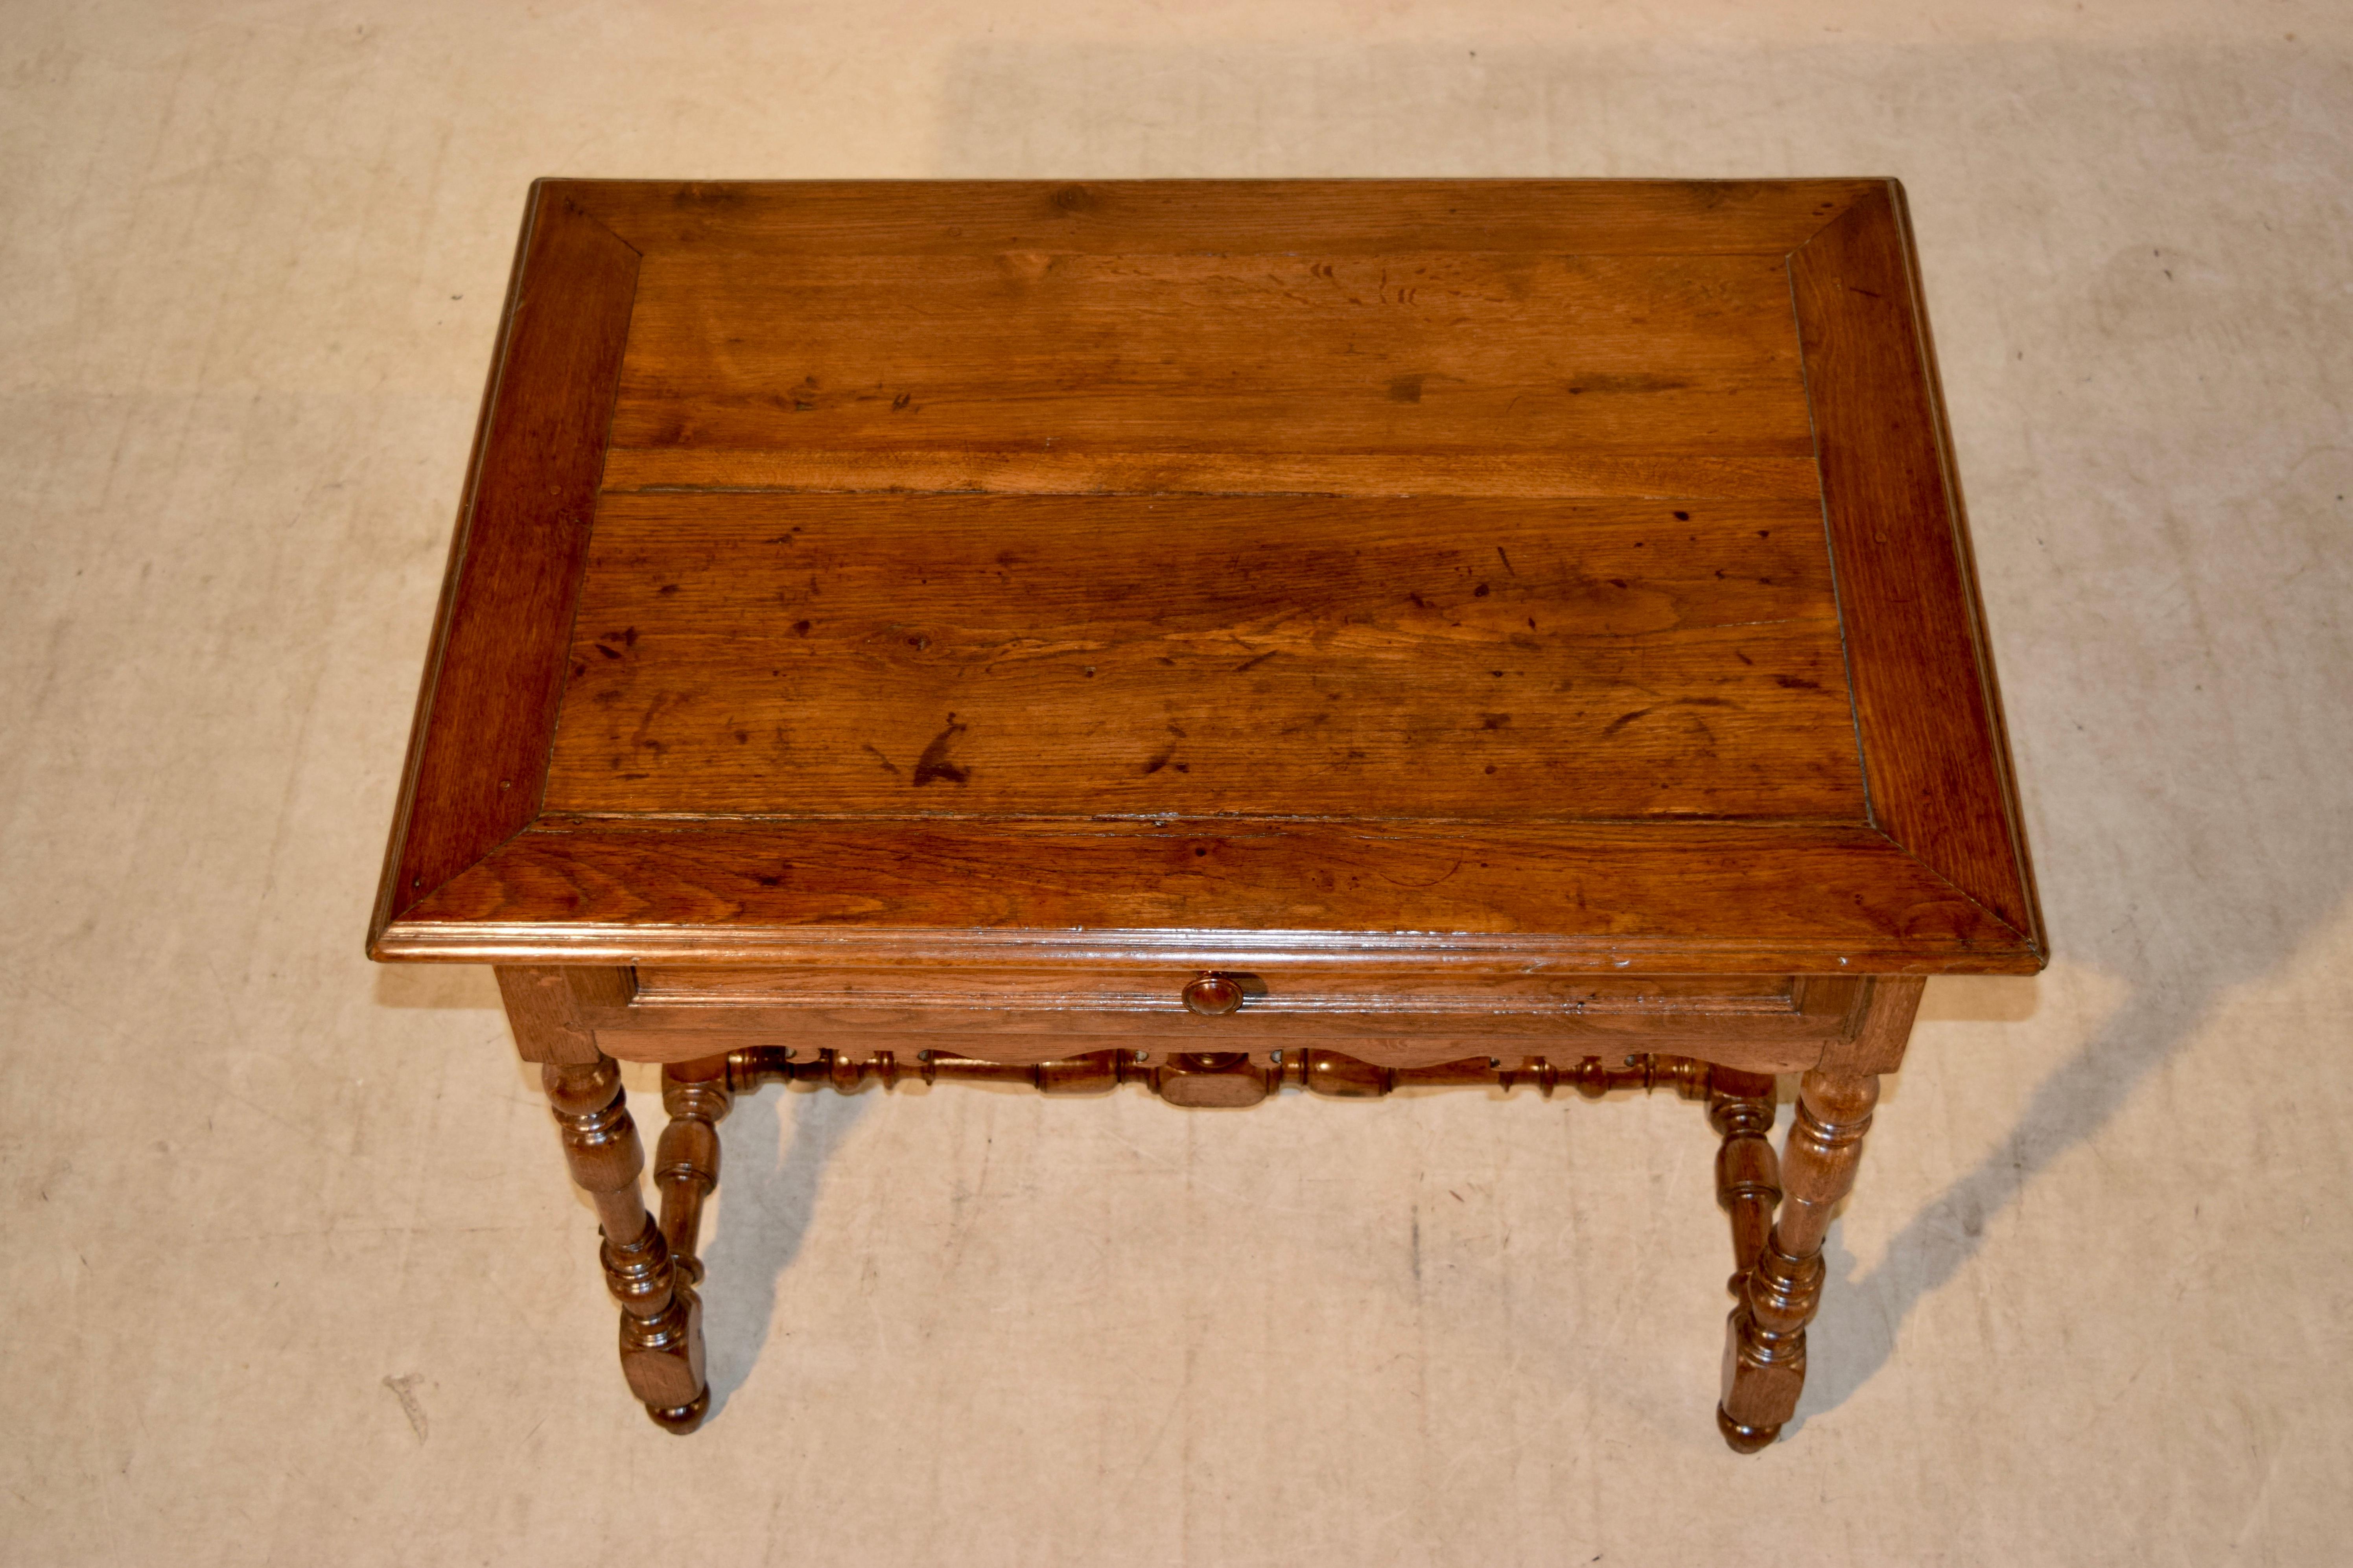 18th century side table